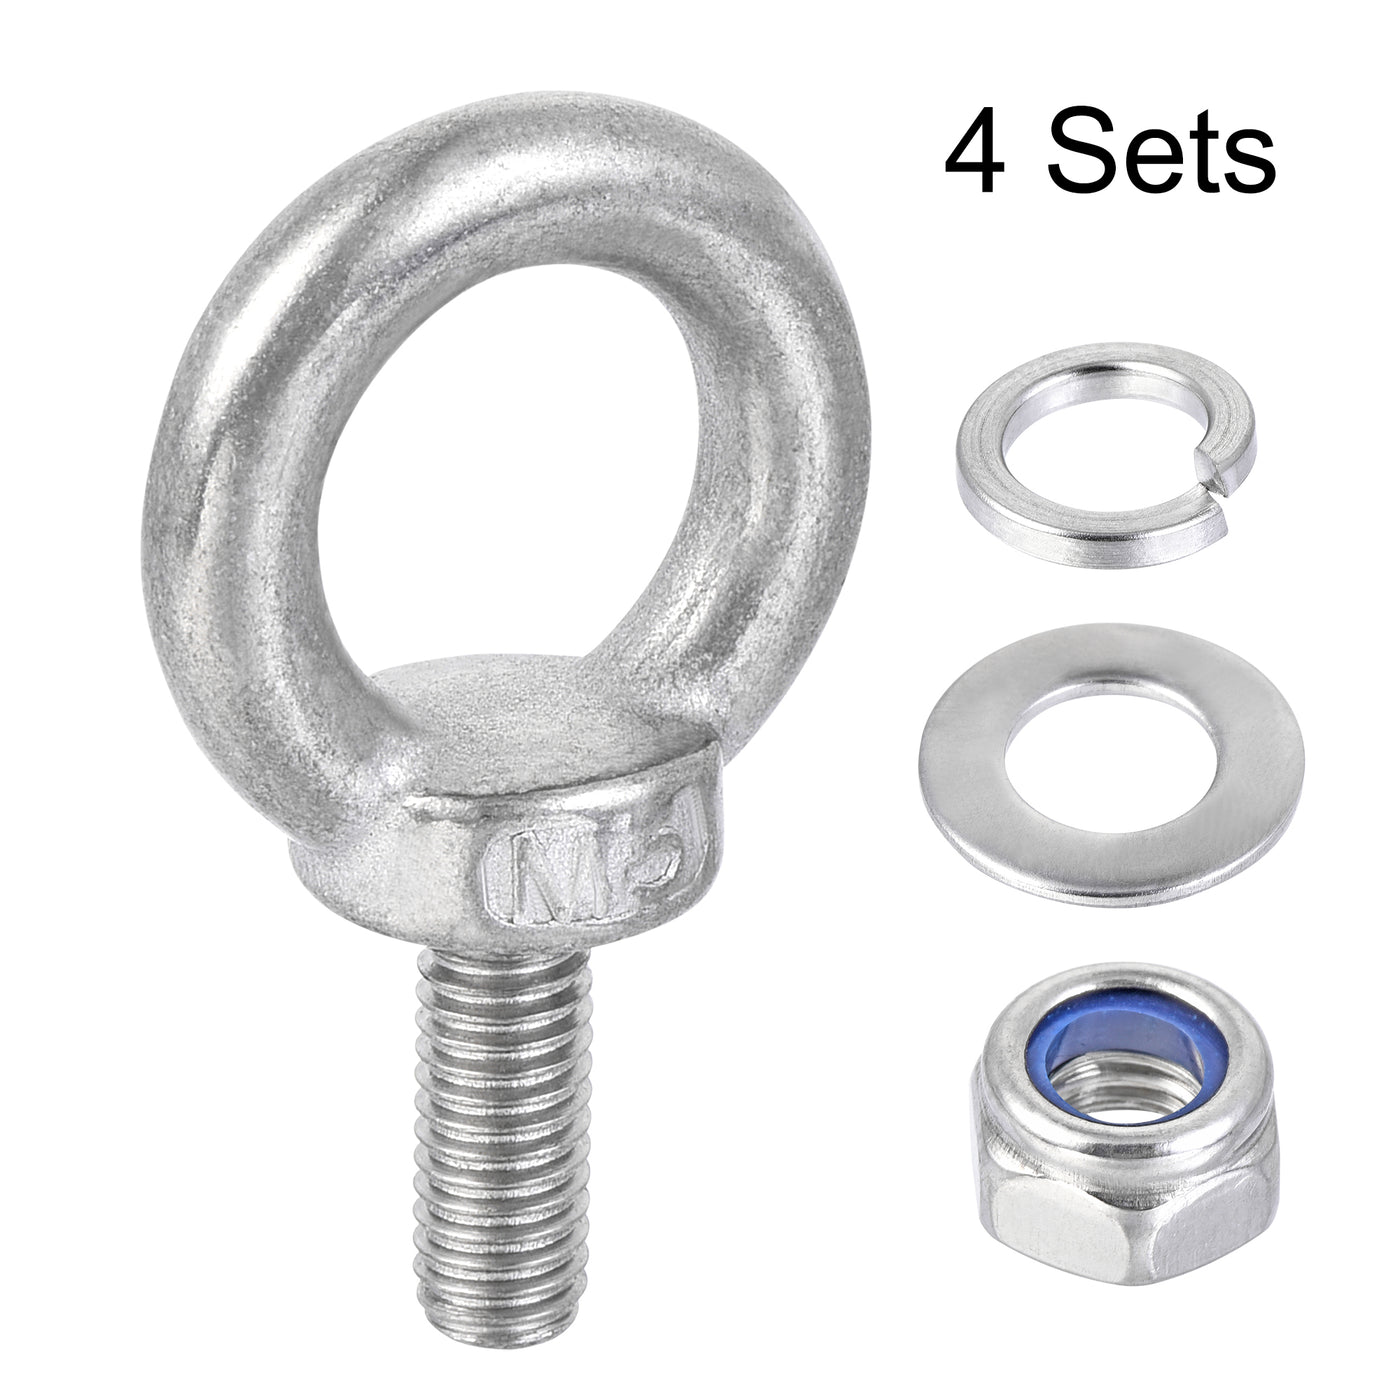 uxcell Uxcell Lifting Eye Bolt M5 x 12.5mm Male Thread with Hex Screw Nut Gasket Flat Washer for Hanging, 304 Stainless Steel, 4 Sets